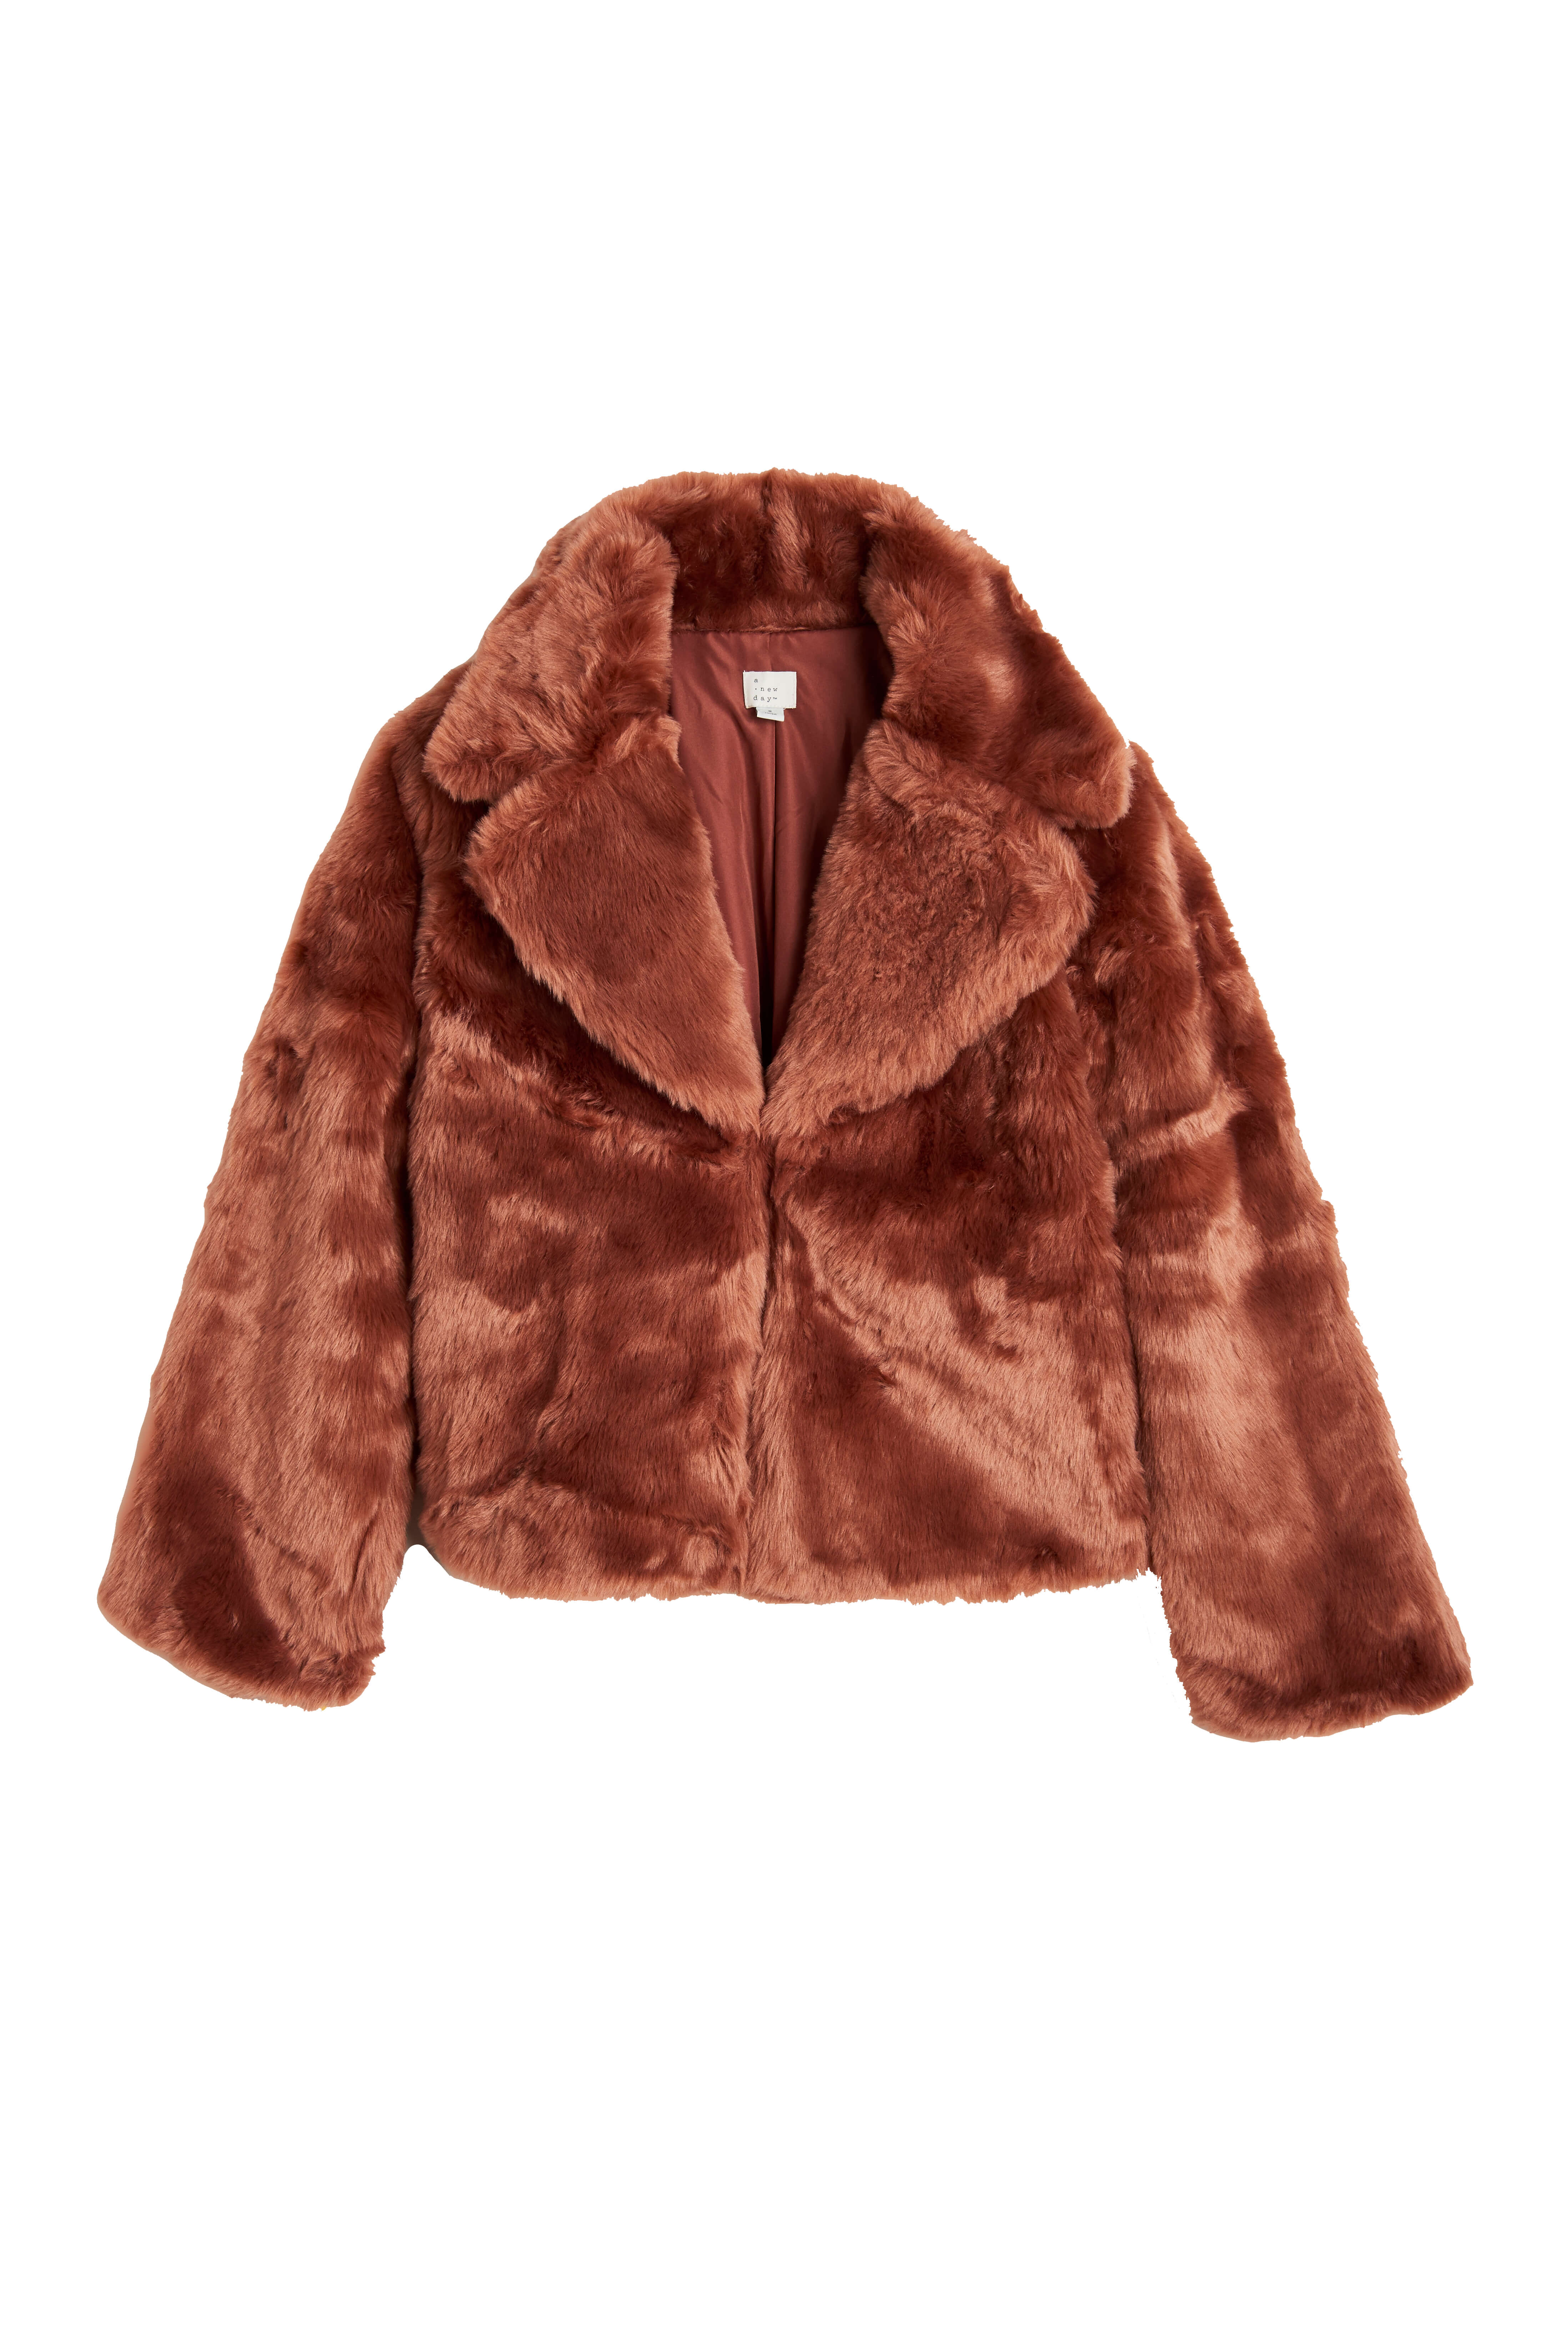 A New Day Holiday Fur in Jacket Blush Brown